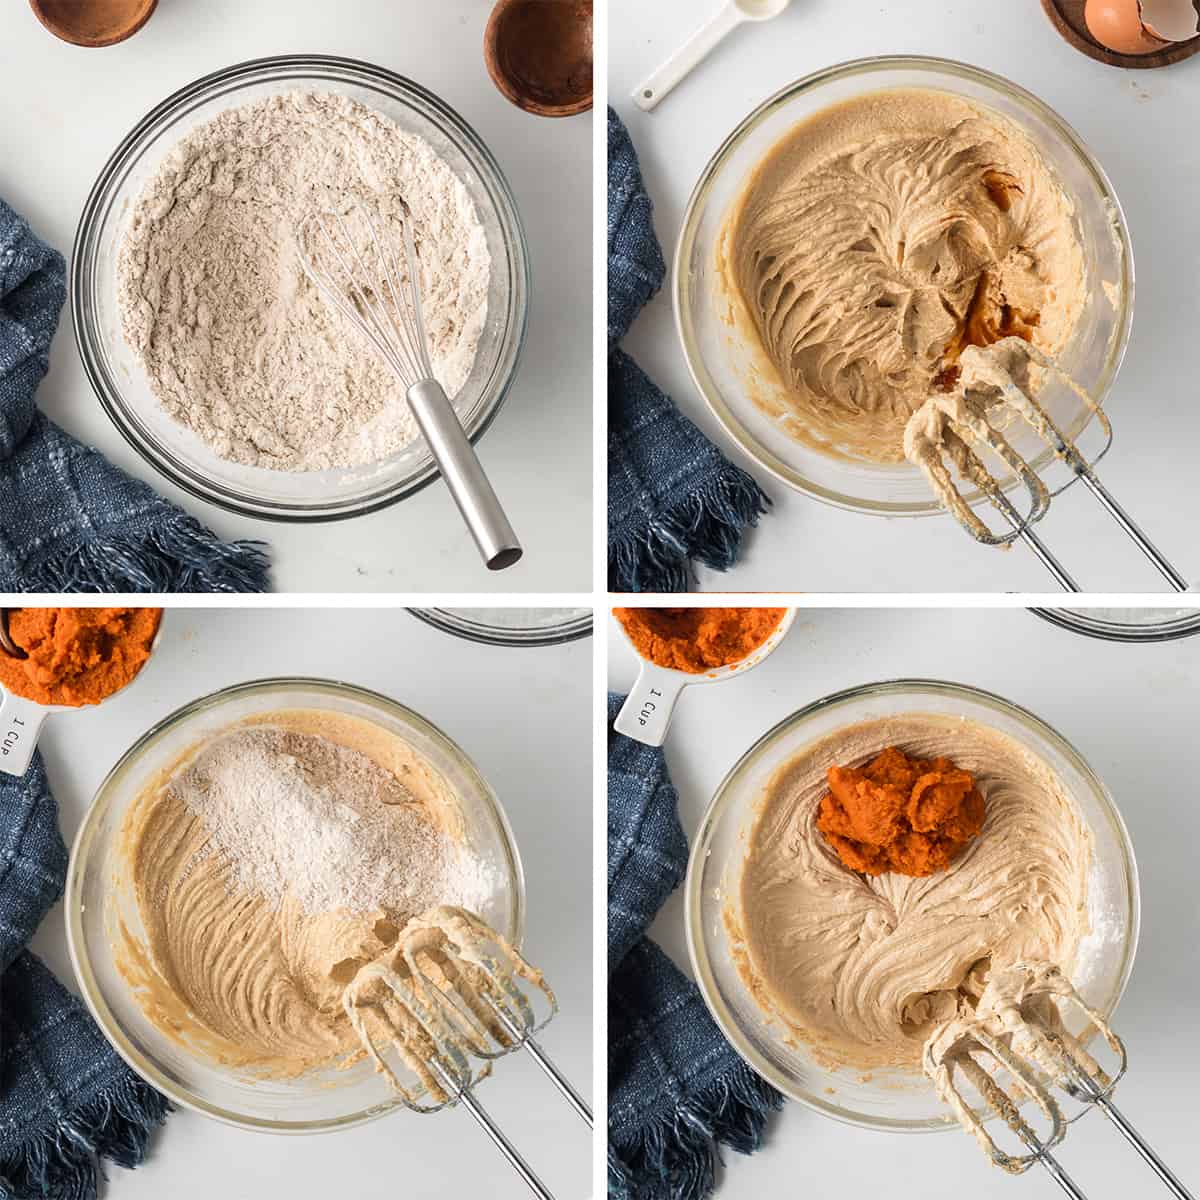 Four images of dry ingredients and wet ingredients being combined in a mixing bowl.